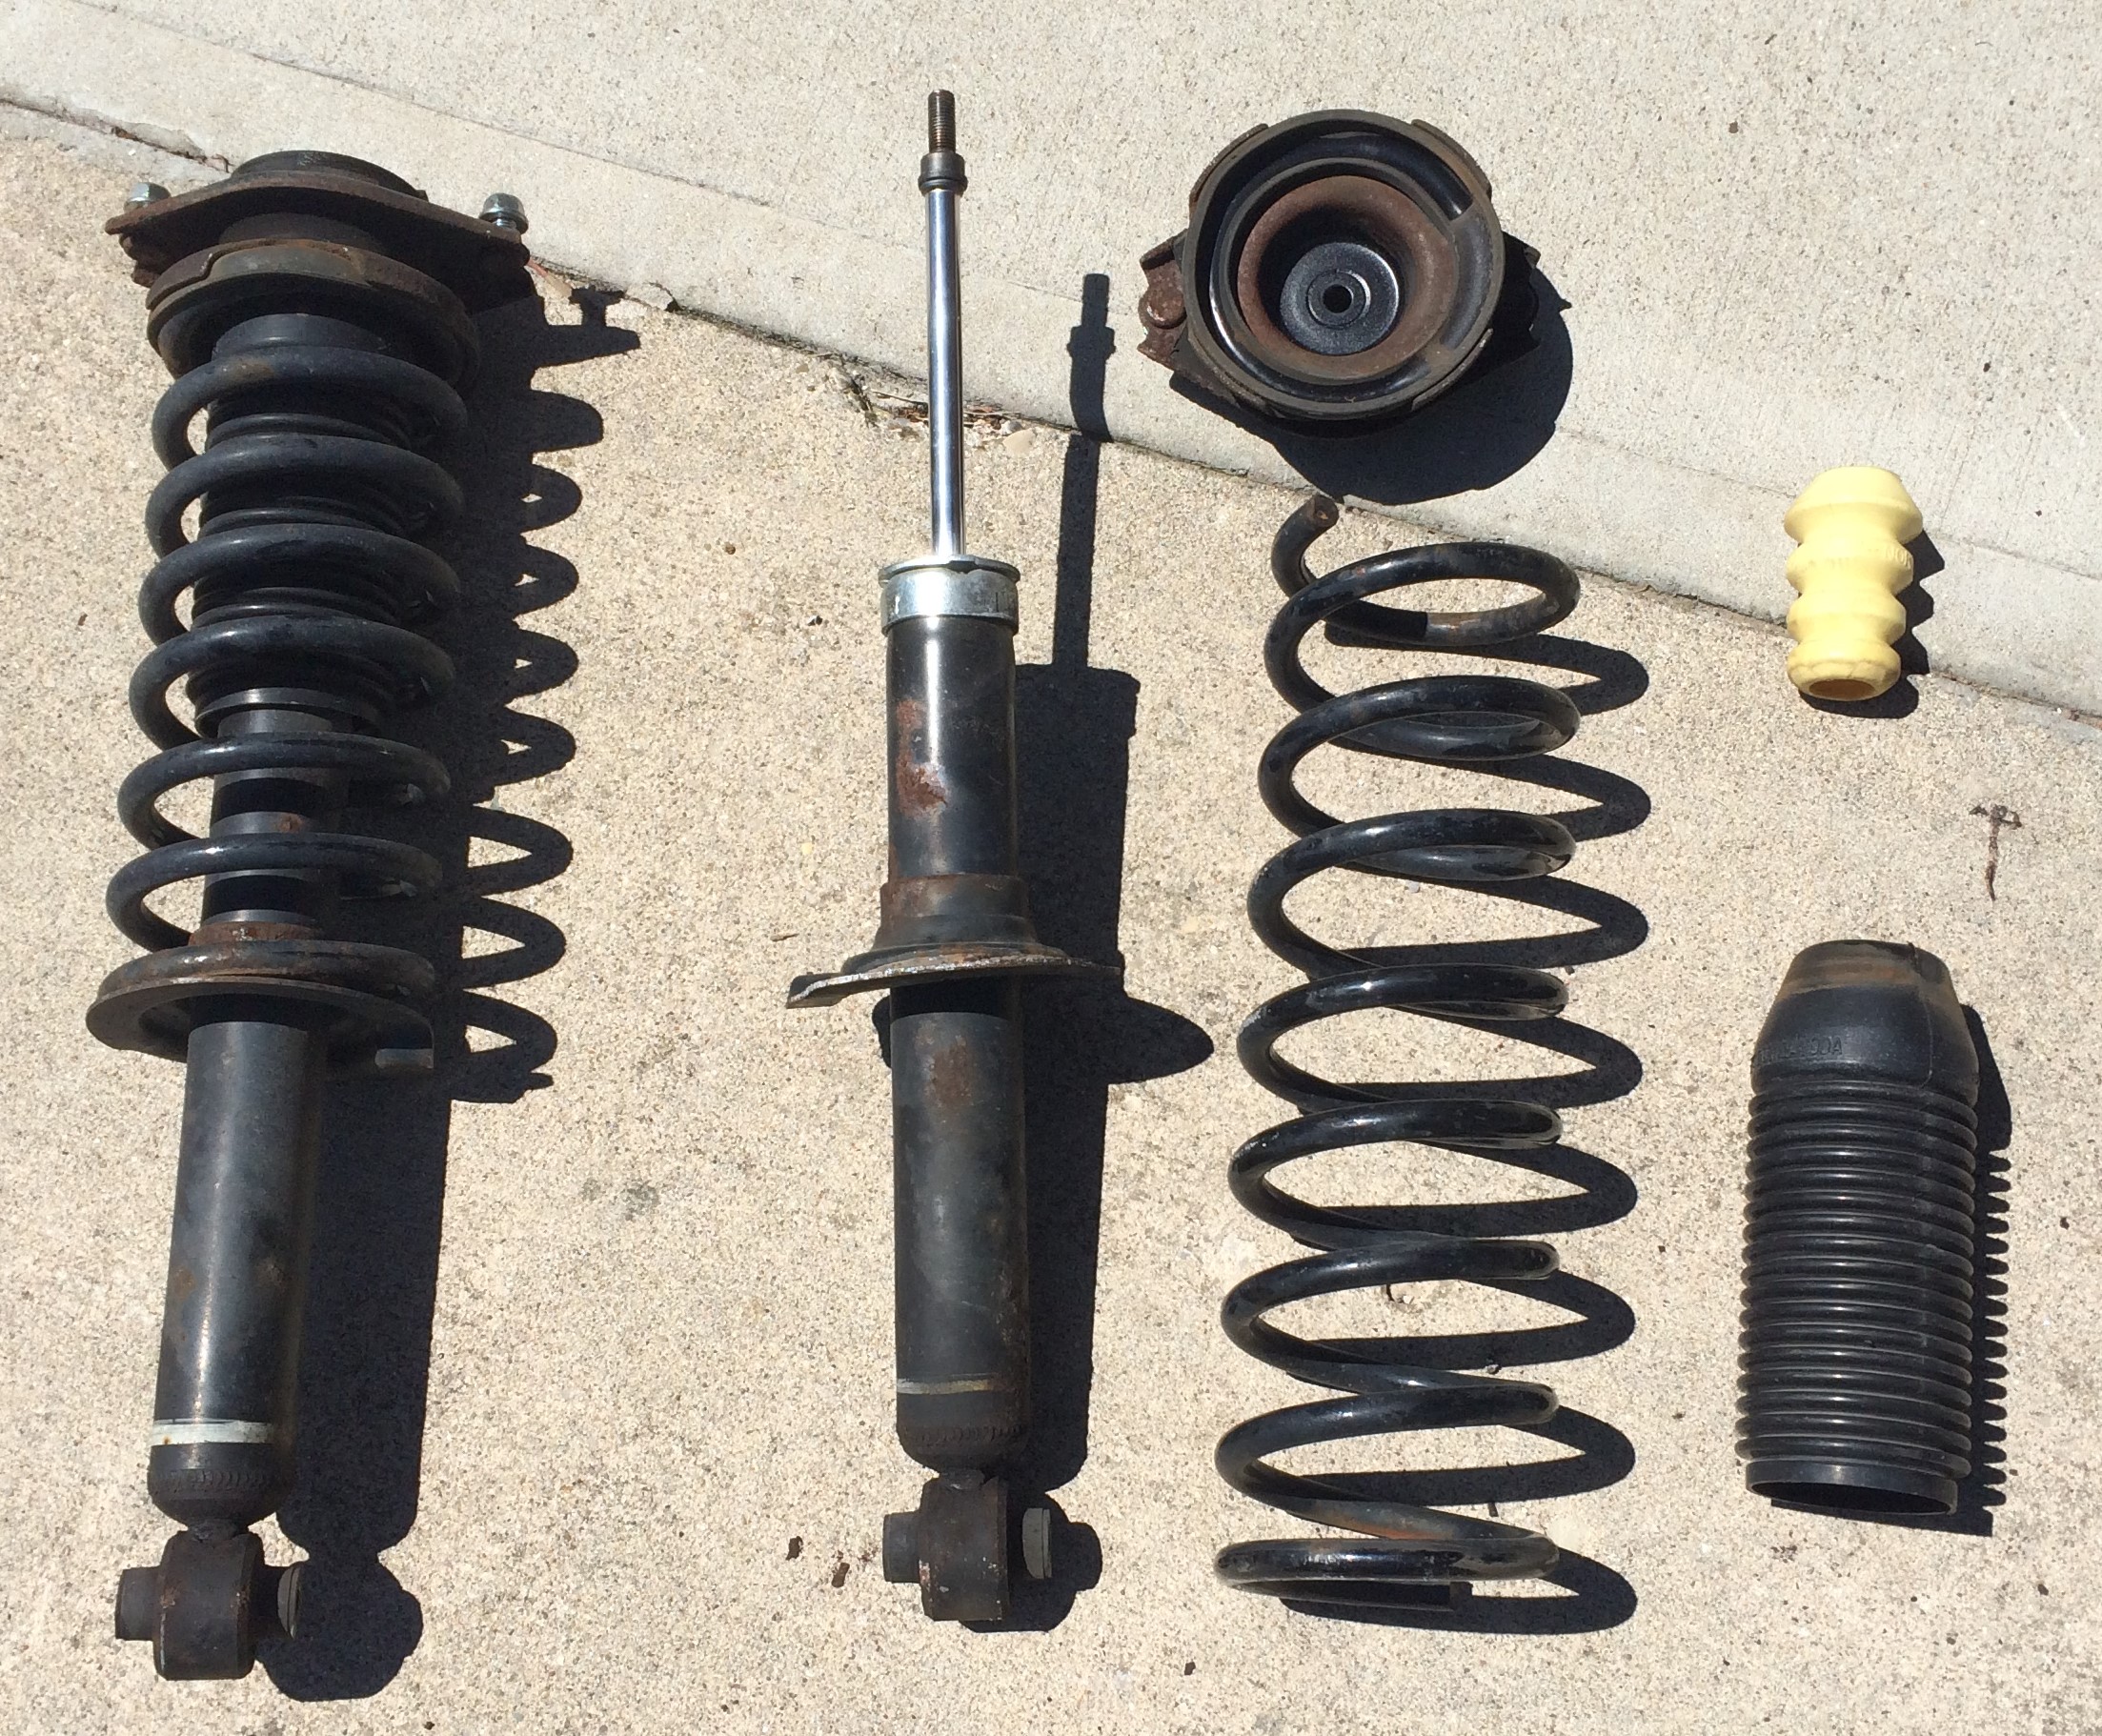 How "Loaded" Shocks/Struts Can Save You Some Suspension Install Time